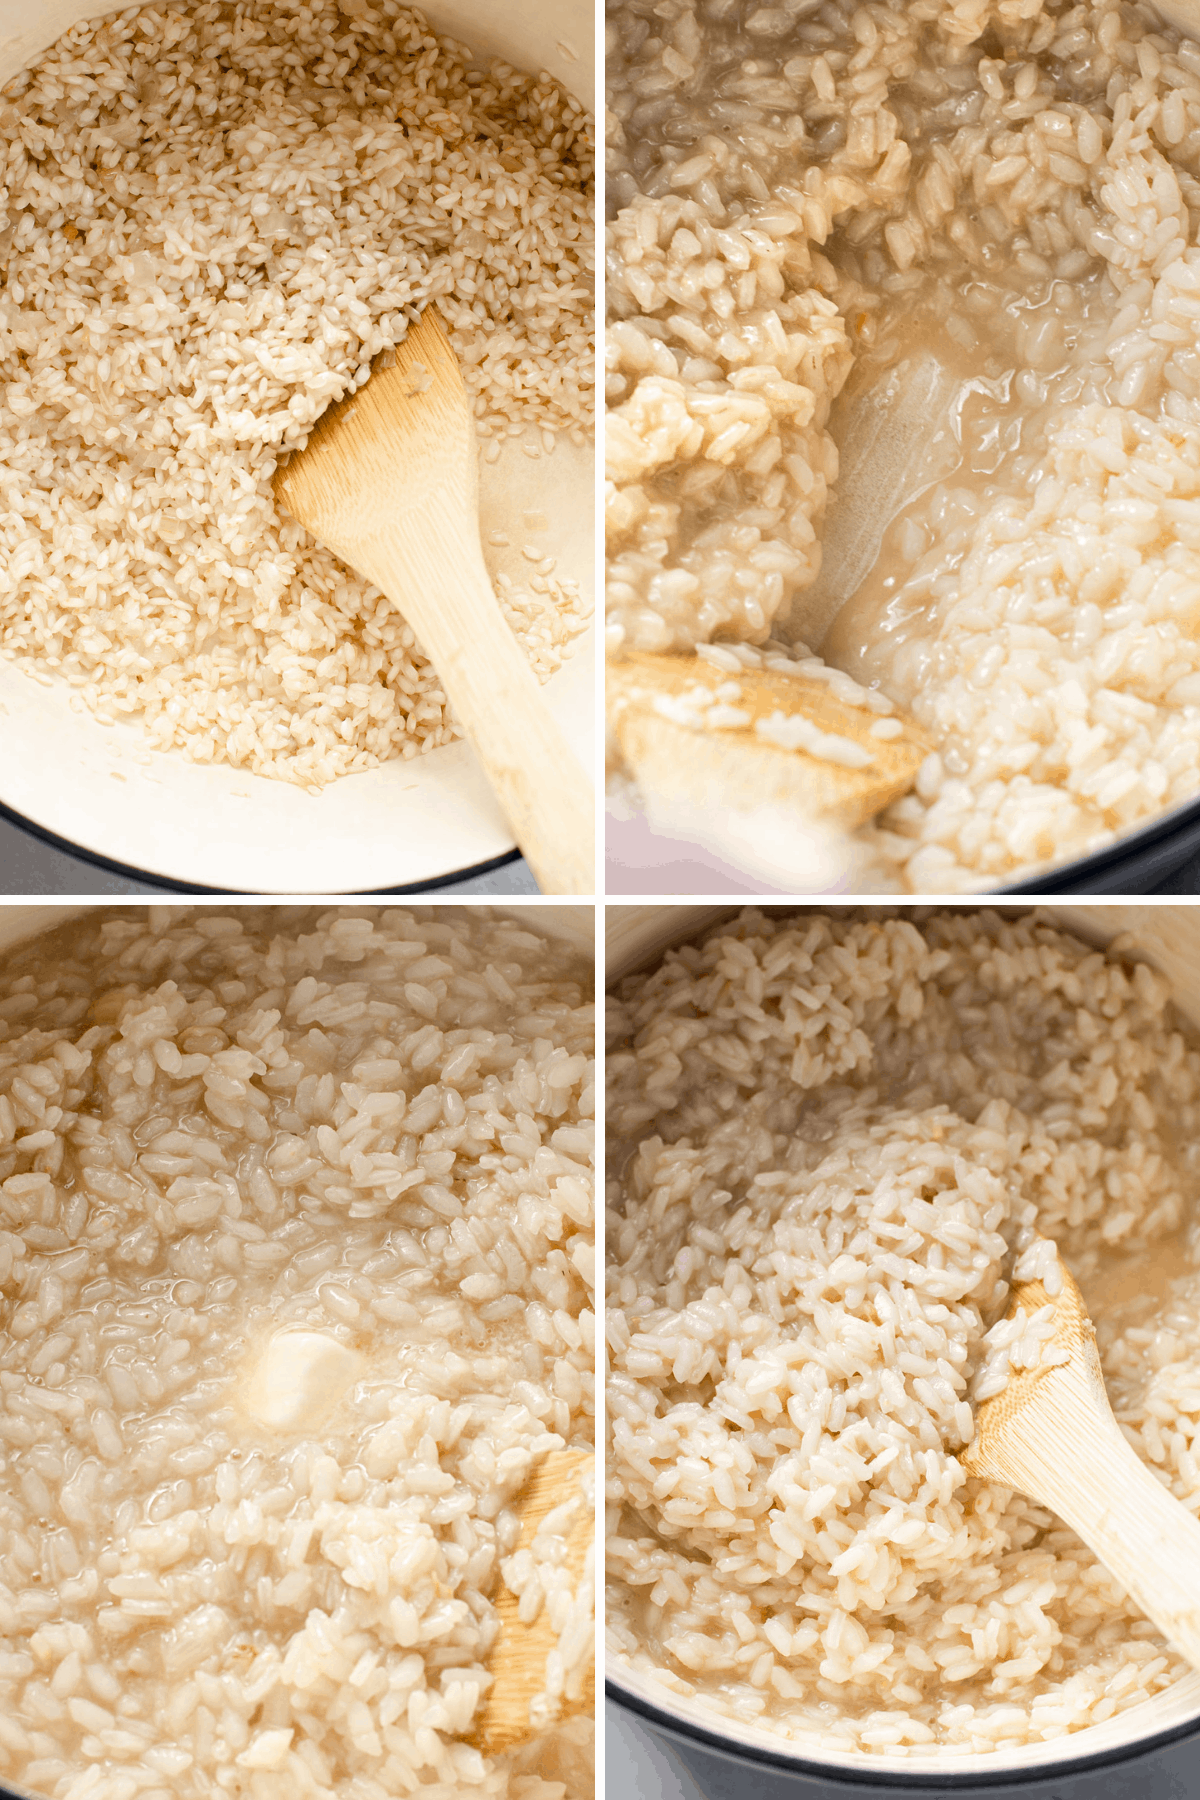 How to make risotto.